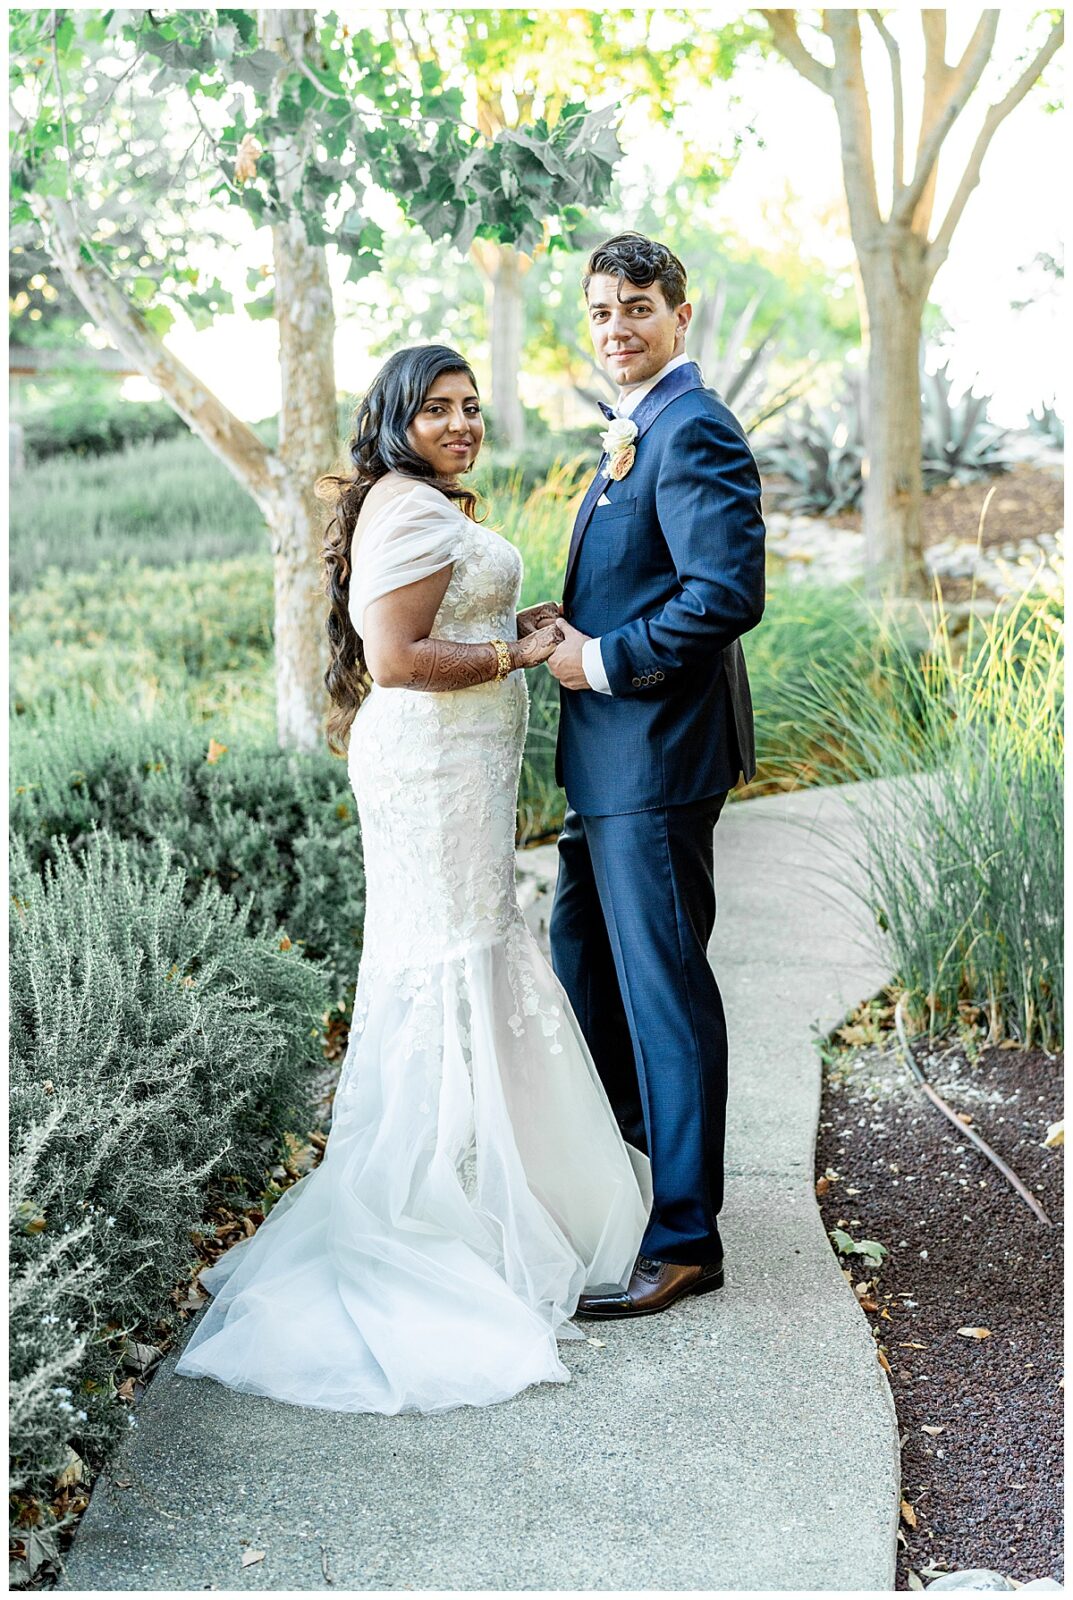 A bride and groom in traditional wedding attire at Willow and Oak Estate in a light and airy photography style.